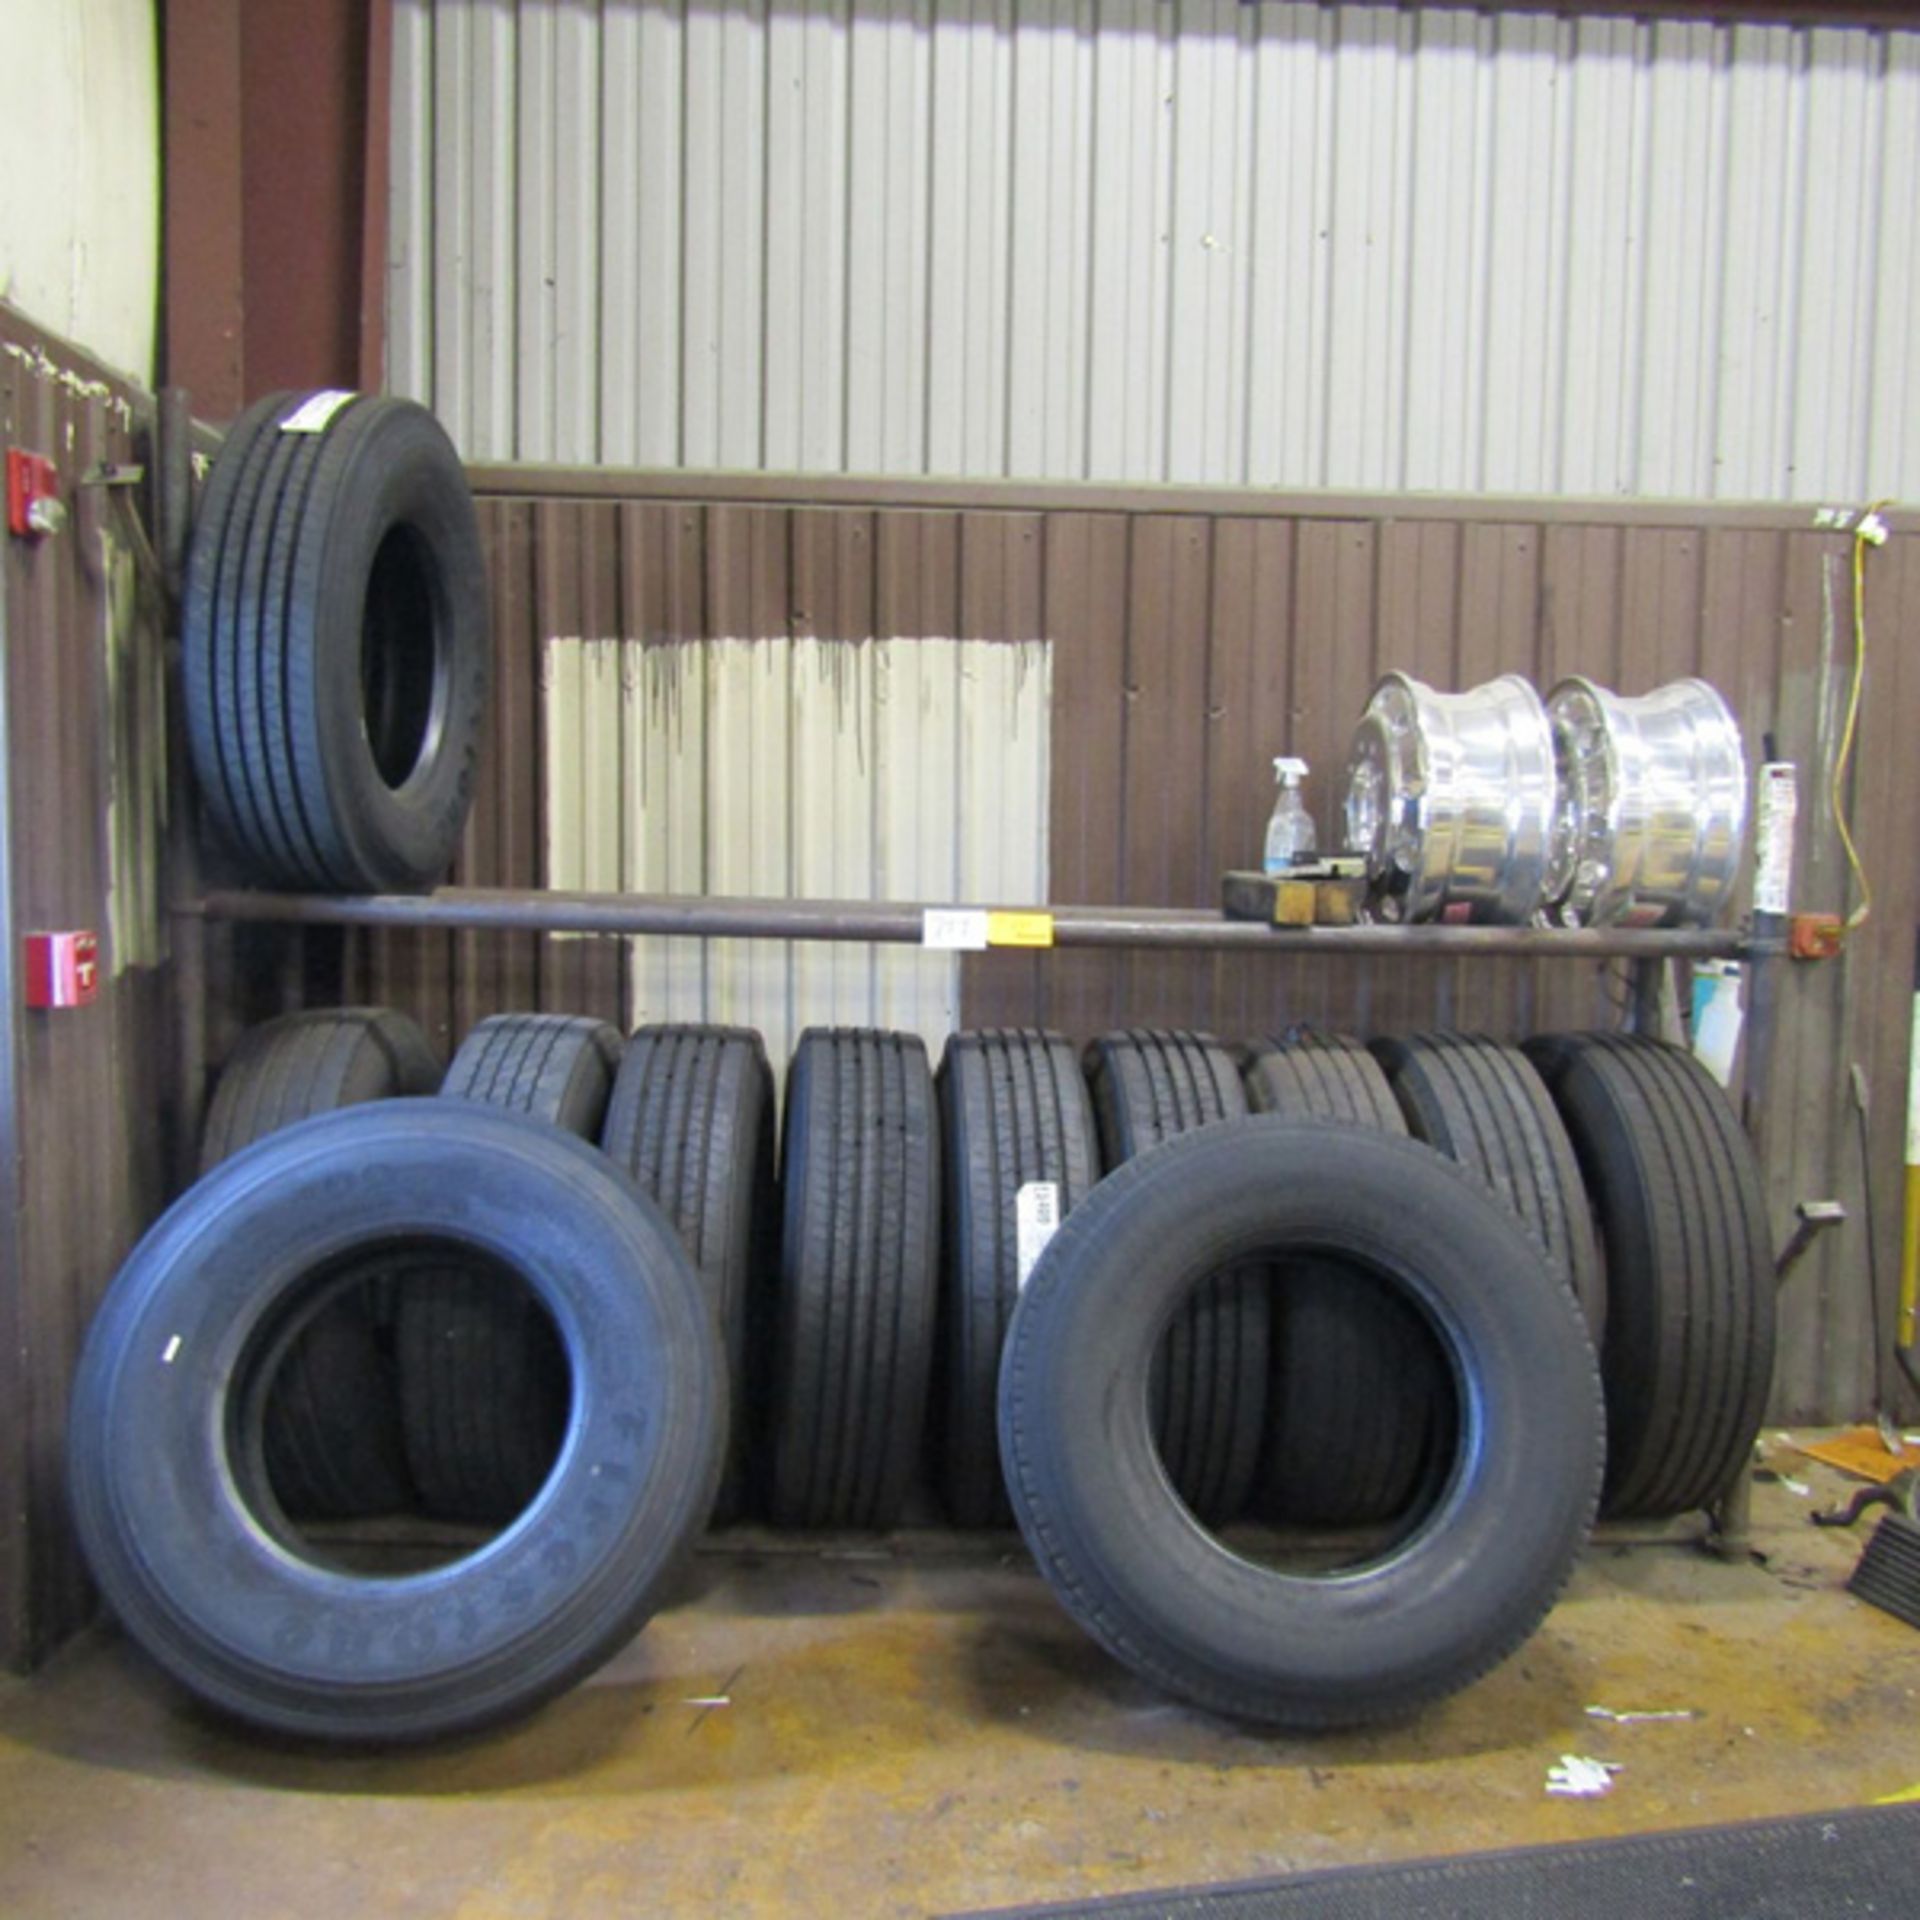 Firestone FS400 Lot of Spare Parts to Include: (12) Tires, (2) Rims, Located In: Indianapolis, IN